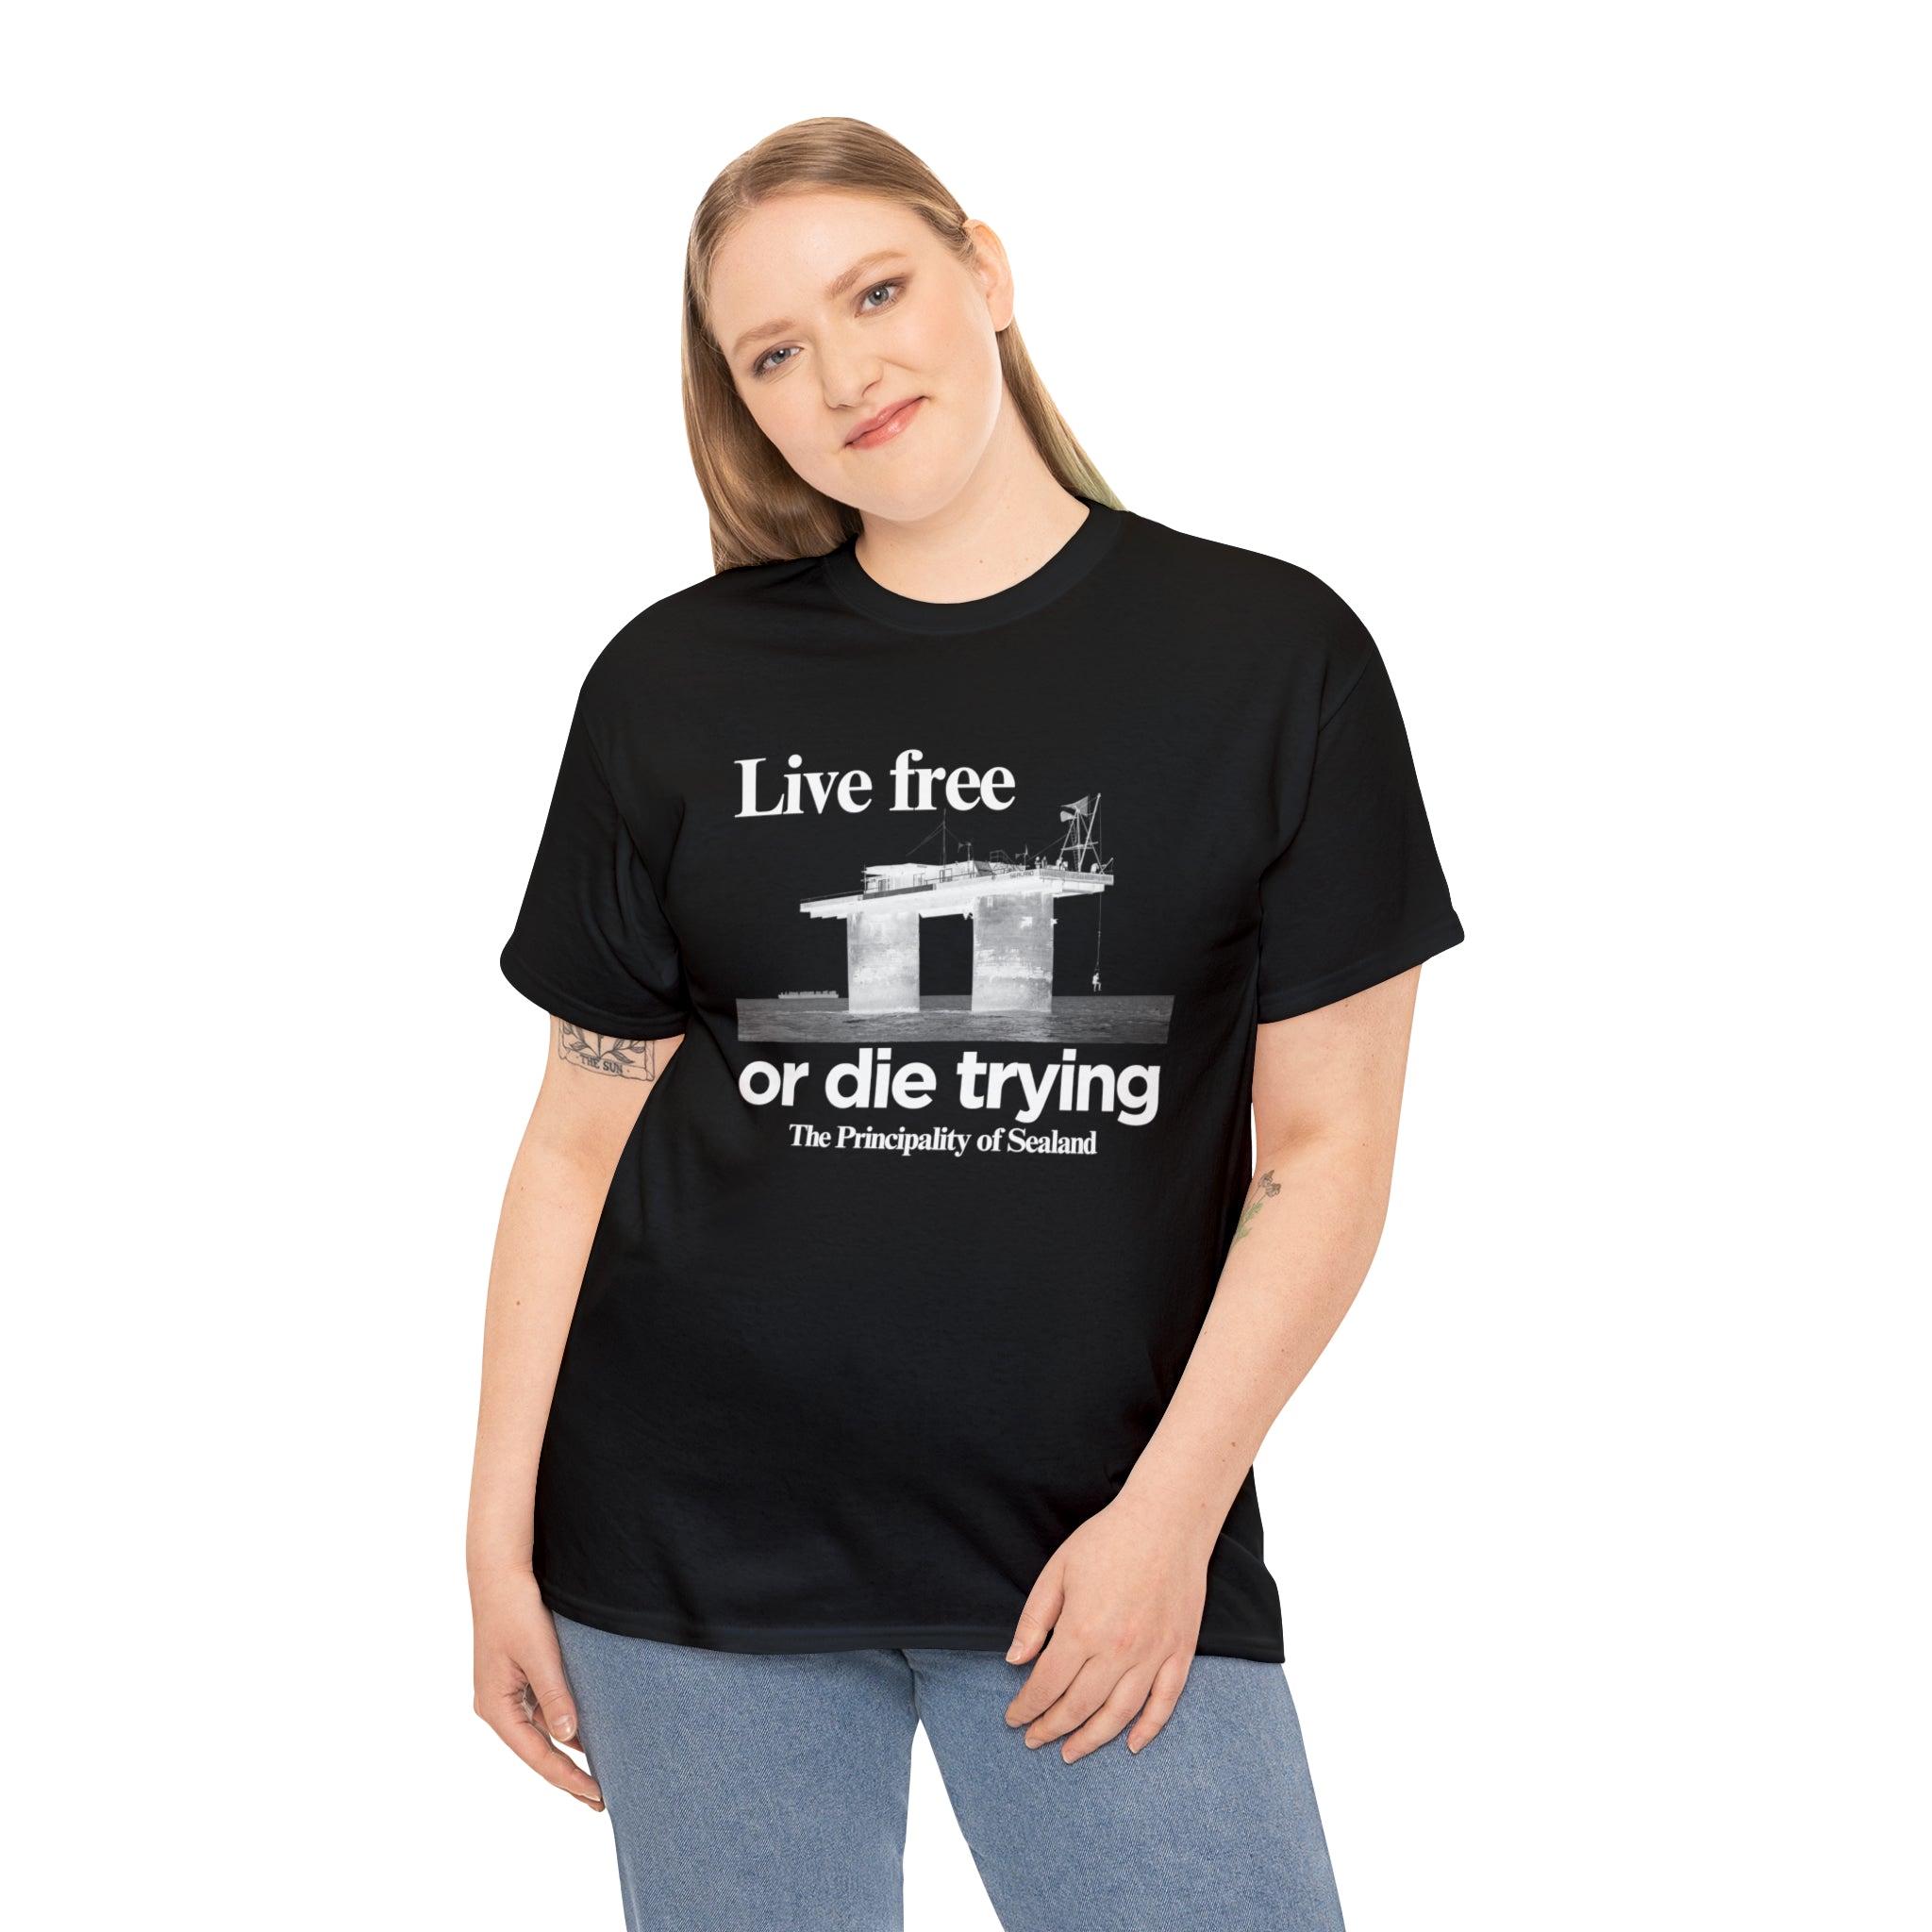 Live free or die trying The Principality of Sealand - Unisex Heavy Cotton Tee